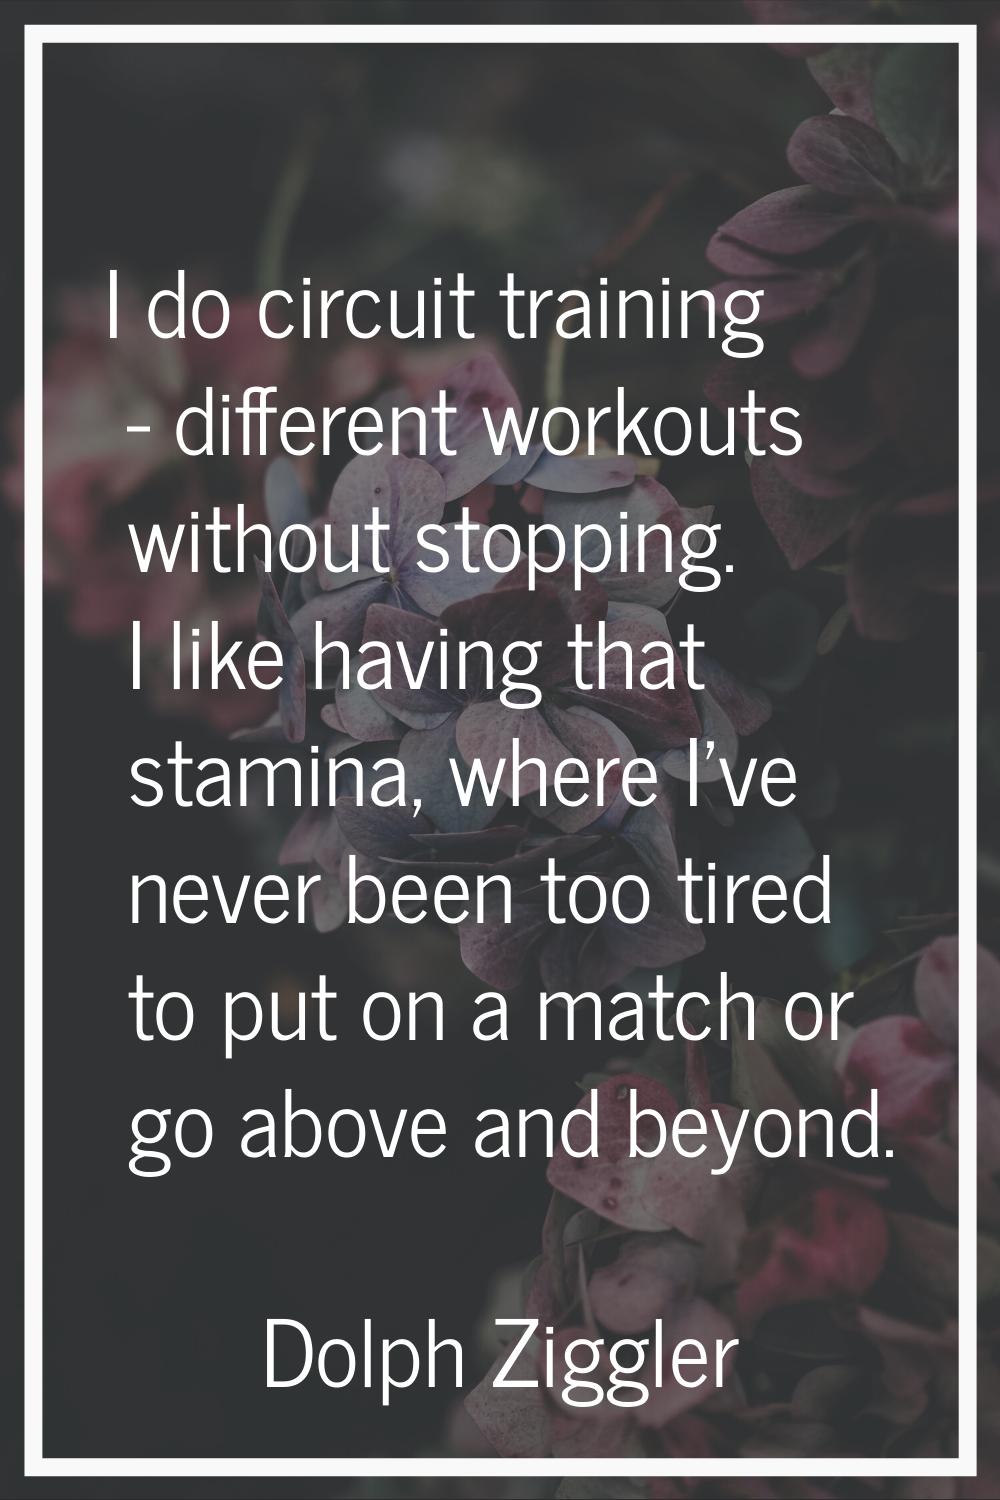 I do circuit training - different workouts without stopping. I like having that stamina, where I've